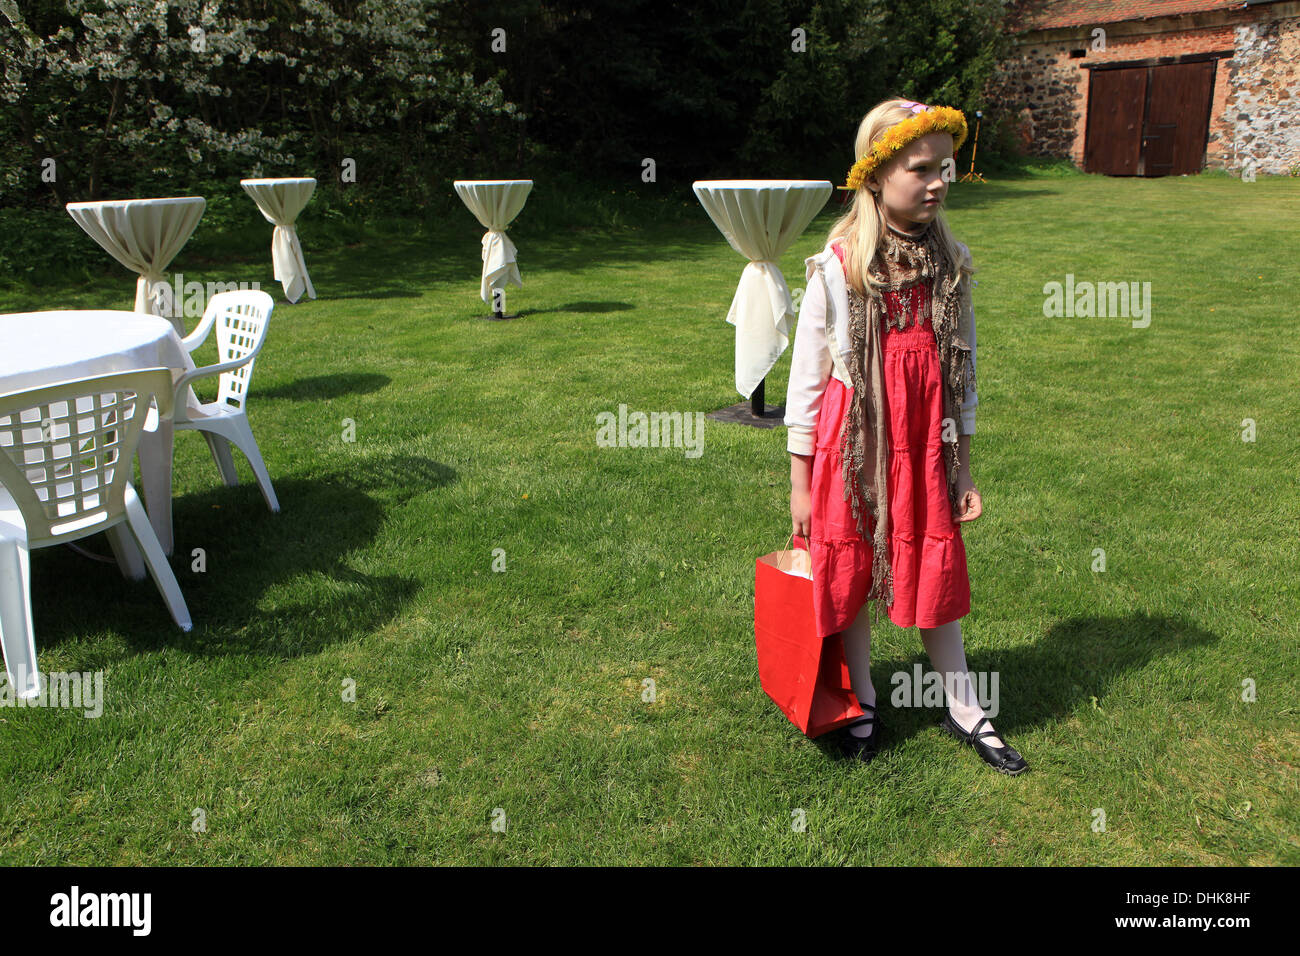 Little girl with dandelion wreath, garden with white tables Stock Photo